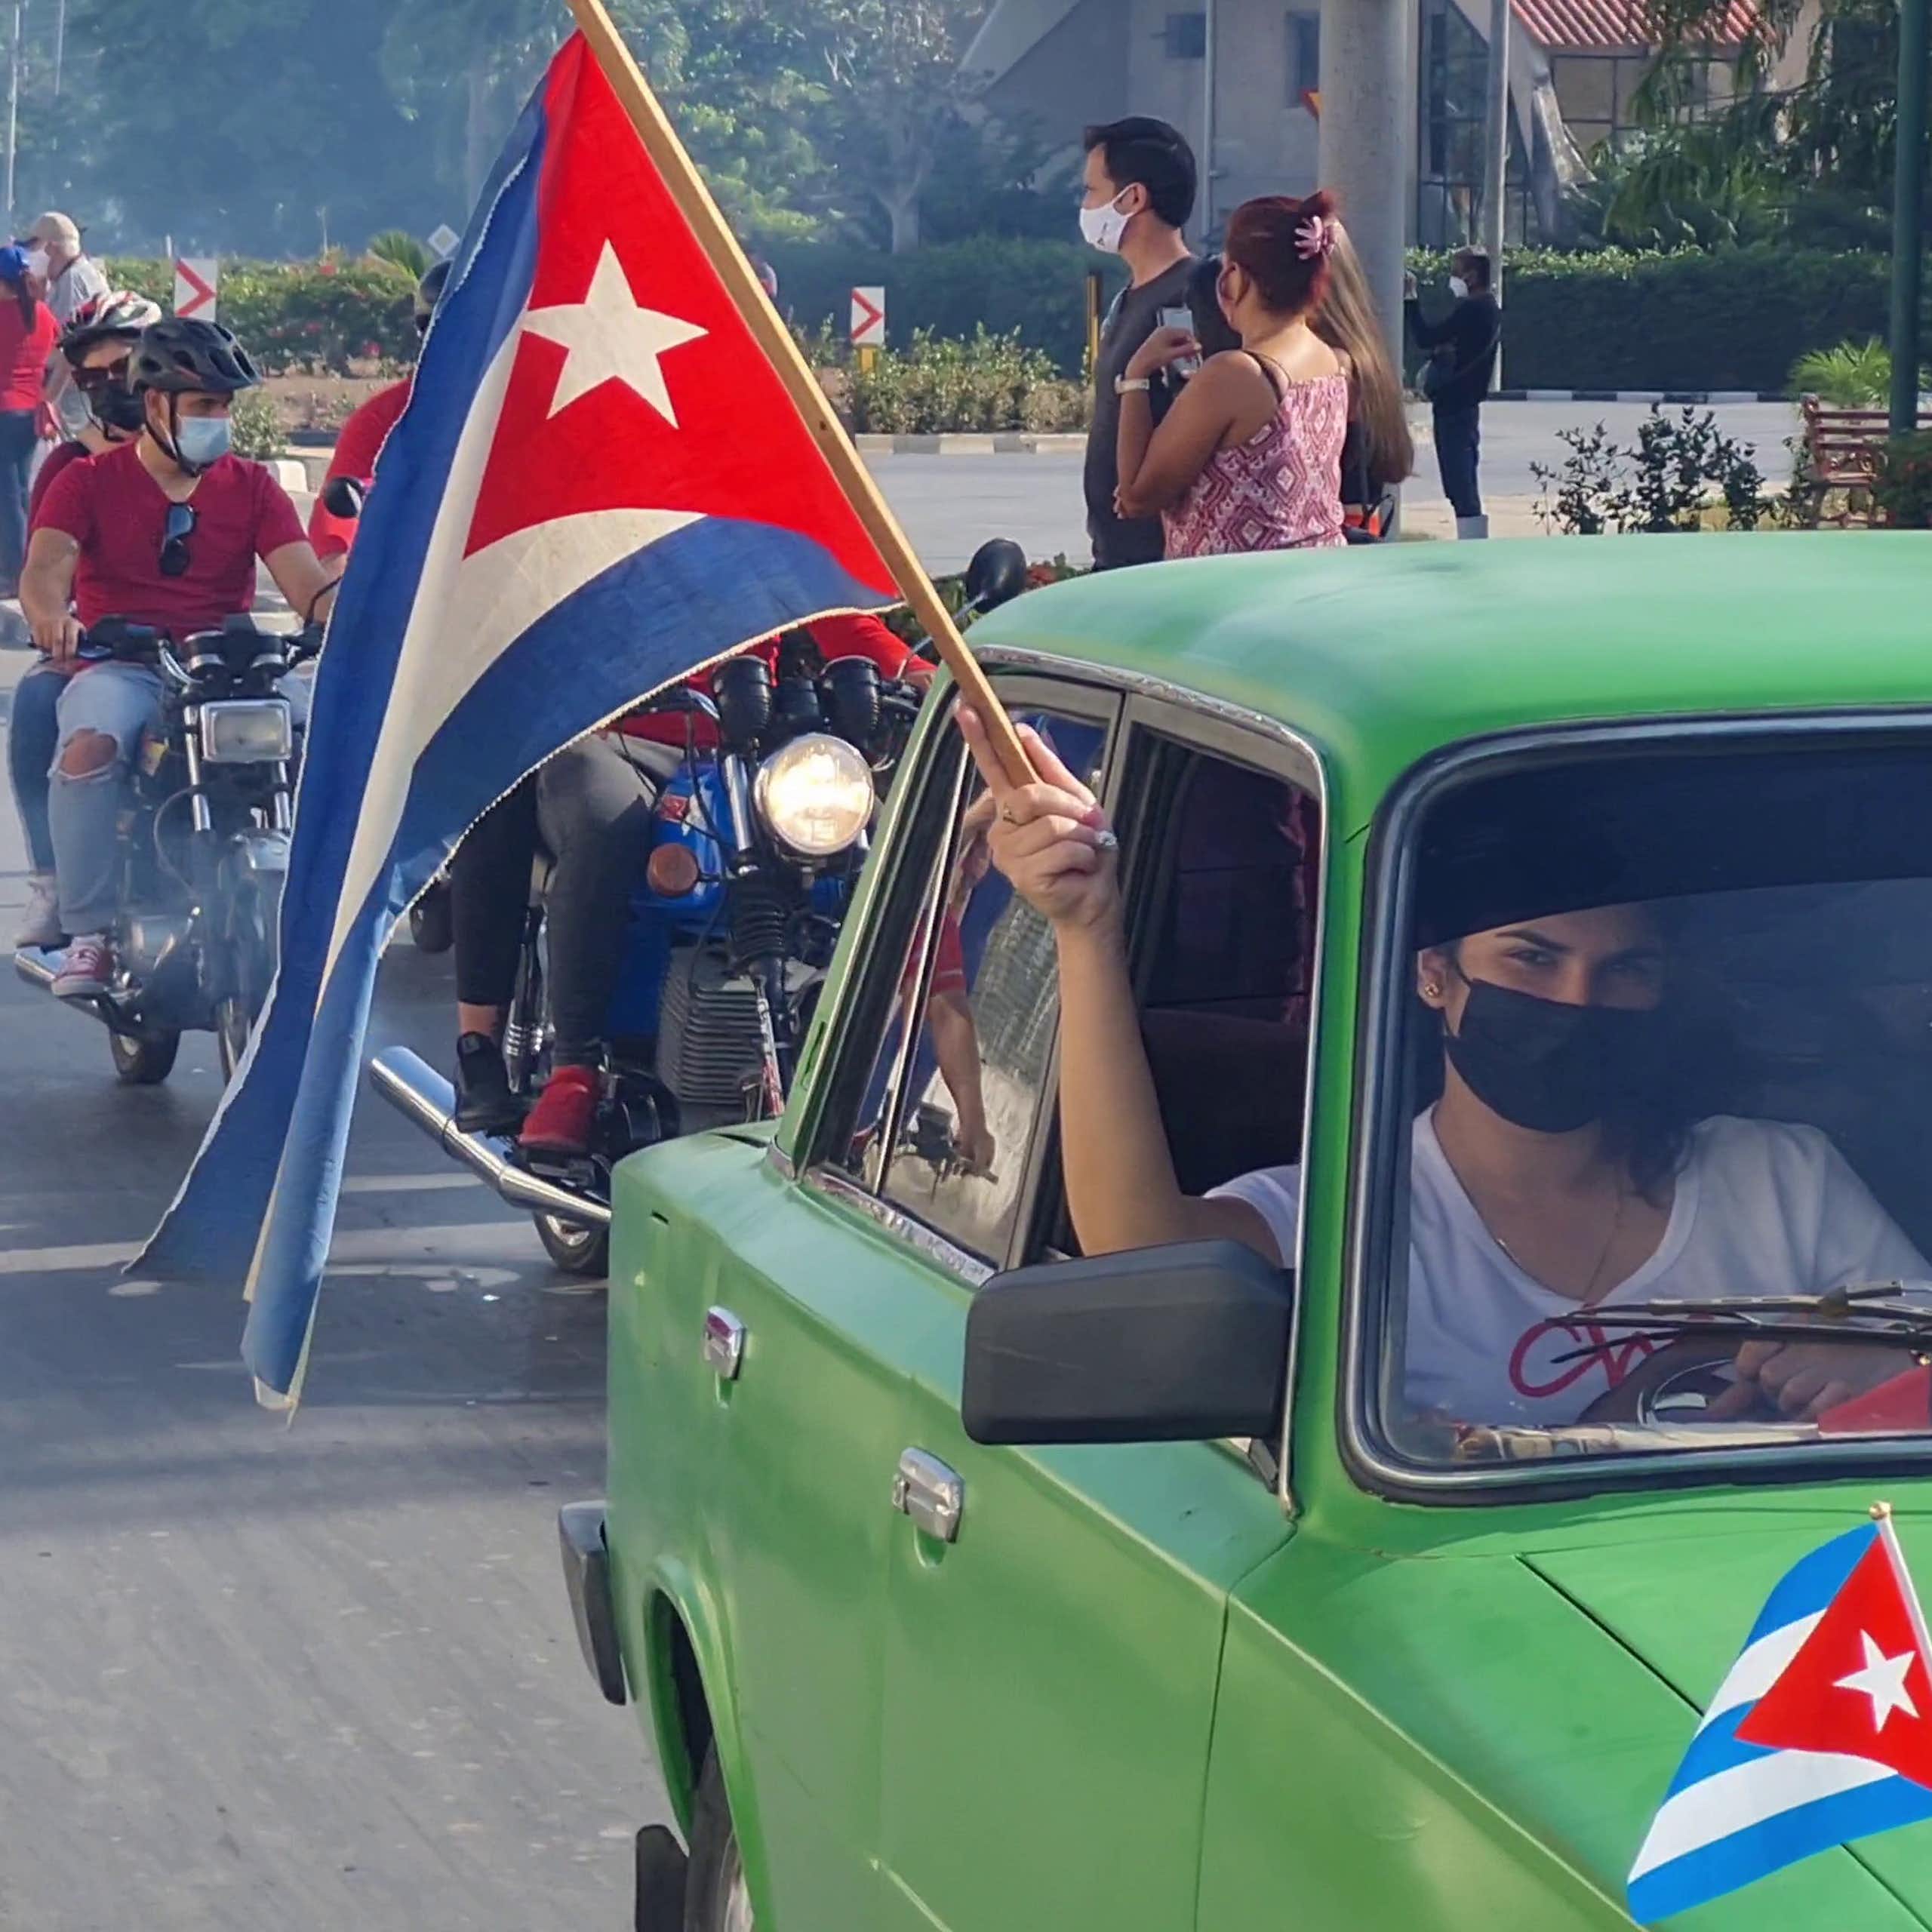 A man in a green car holding a Cuba flag aloft in front a line of motorcycles.